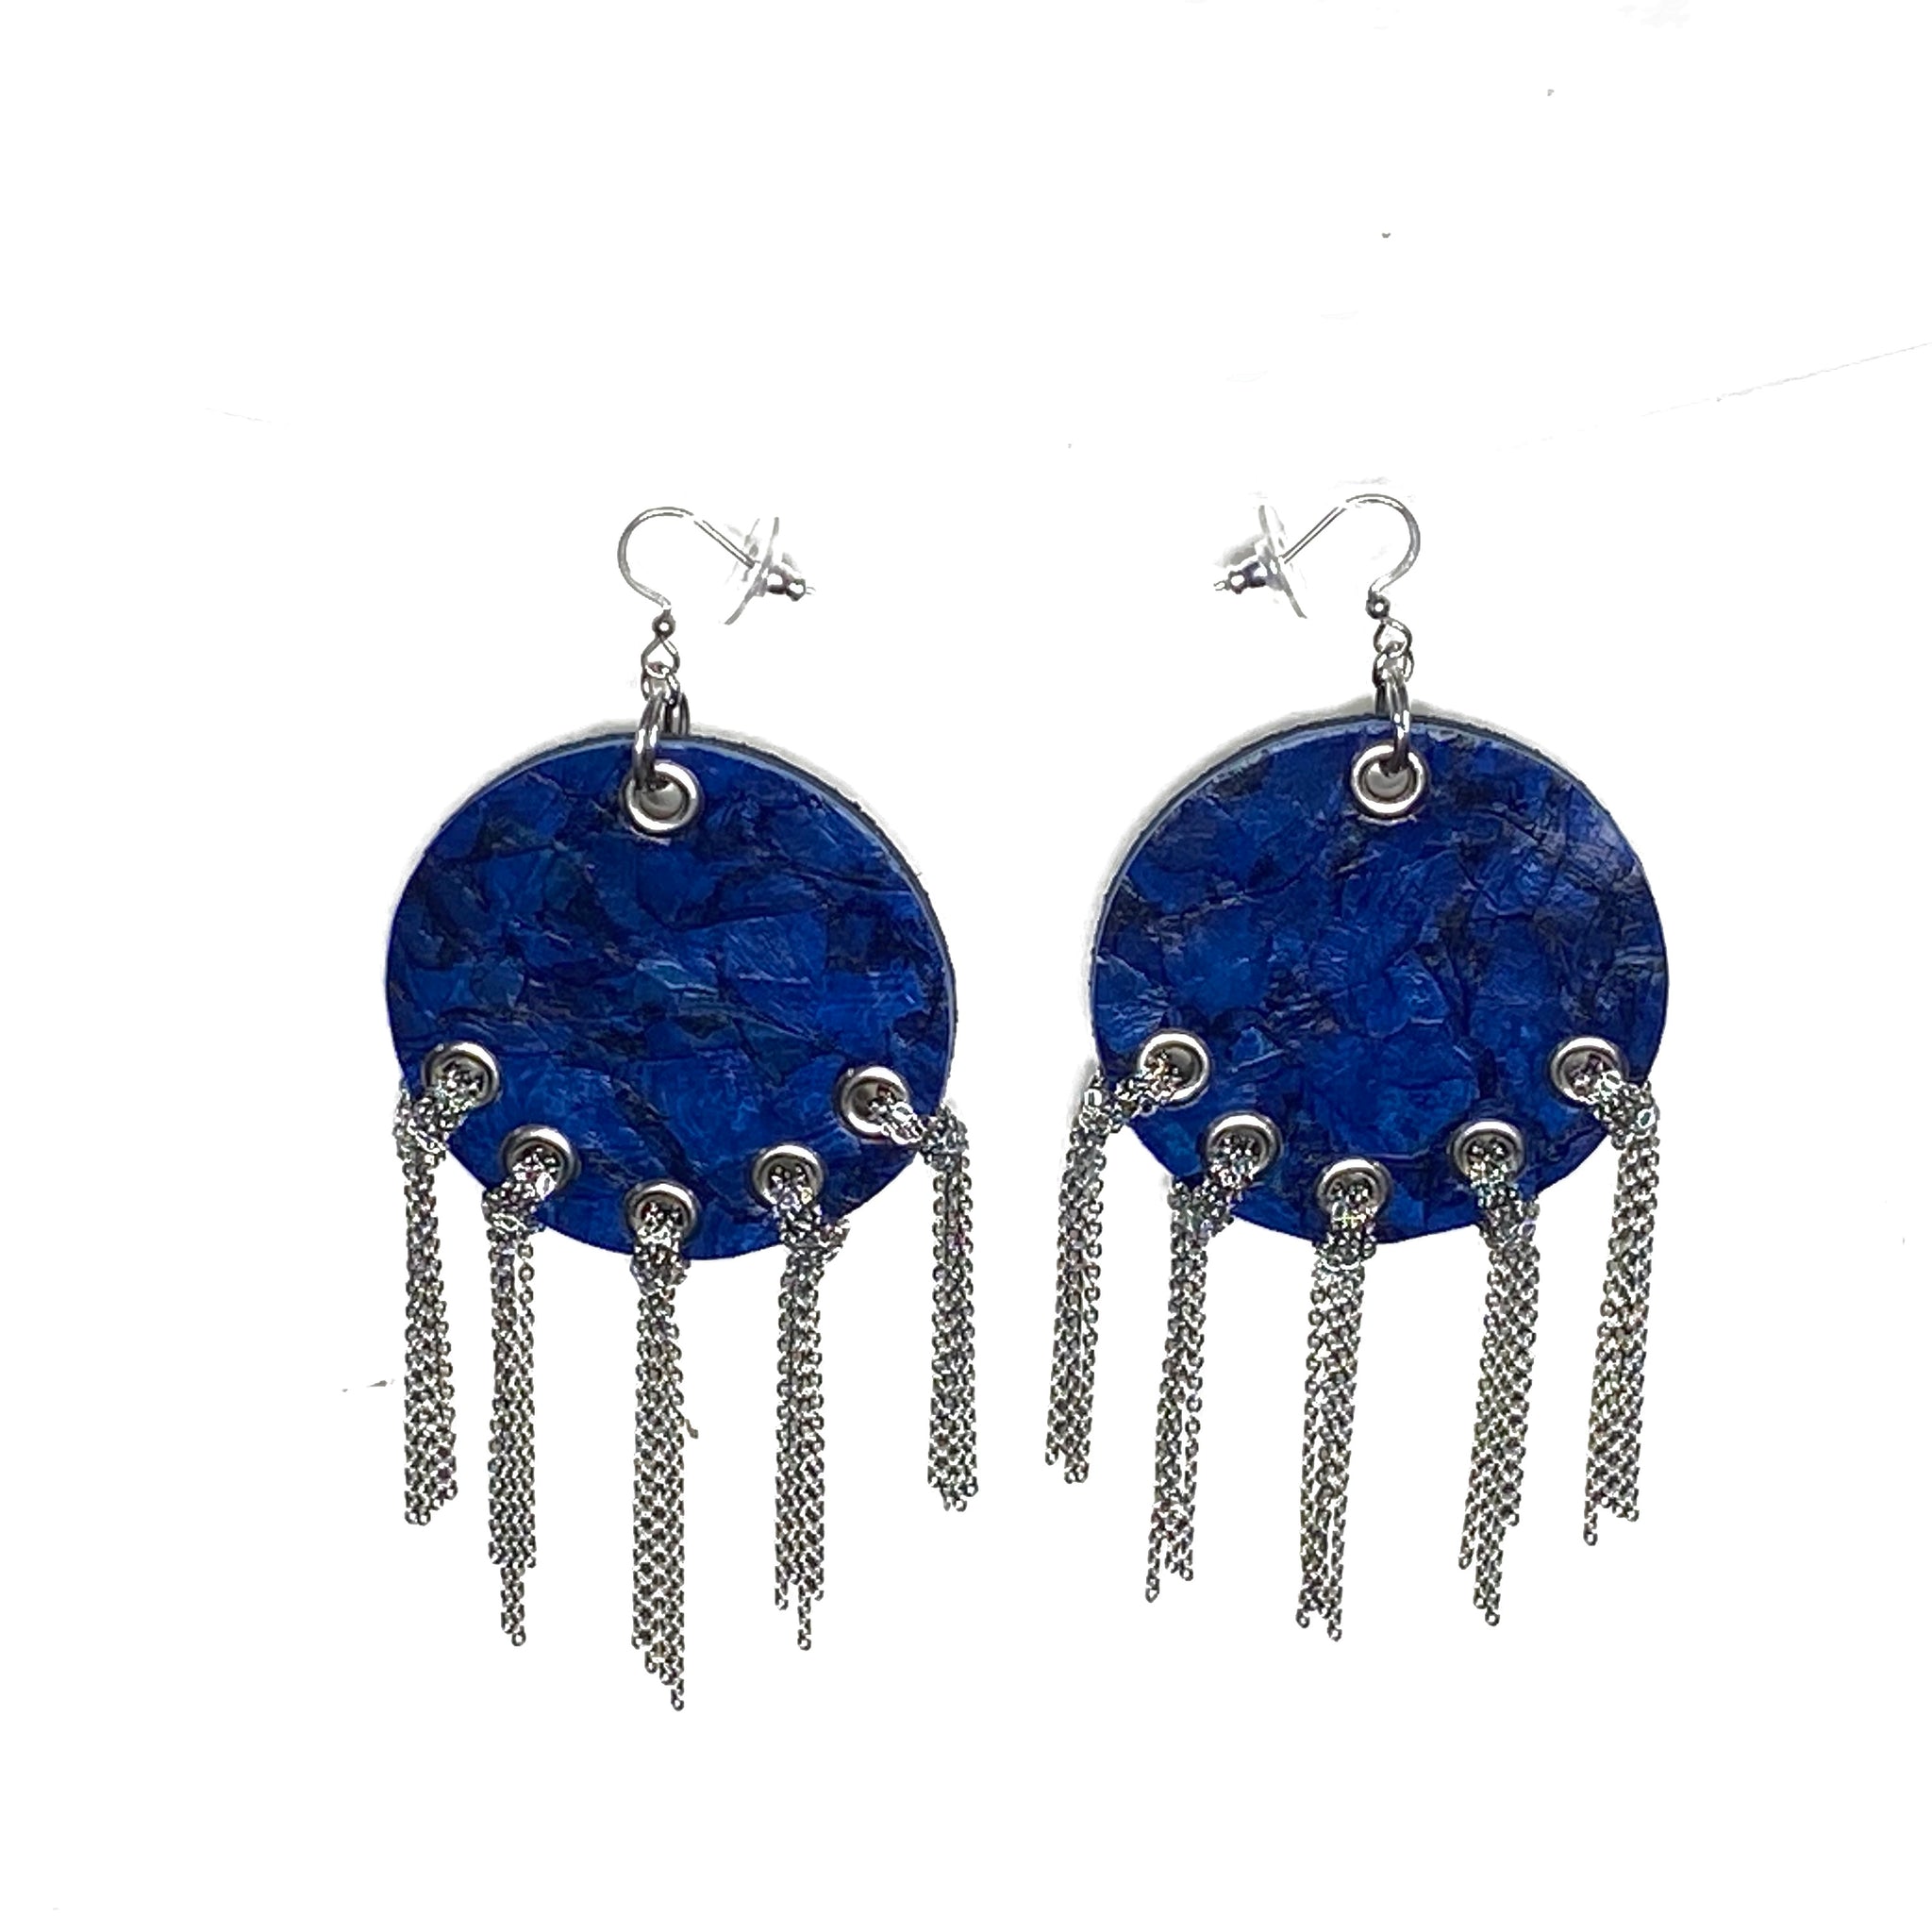 Fish leather earrings with chains